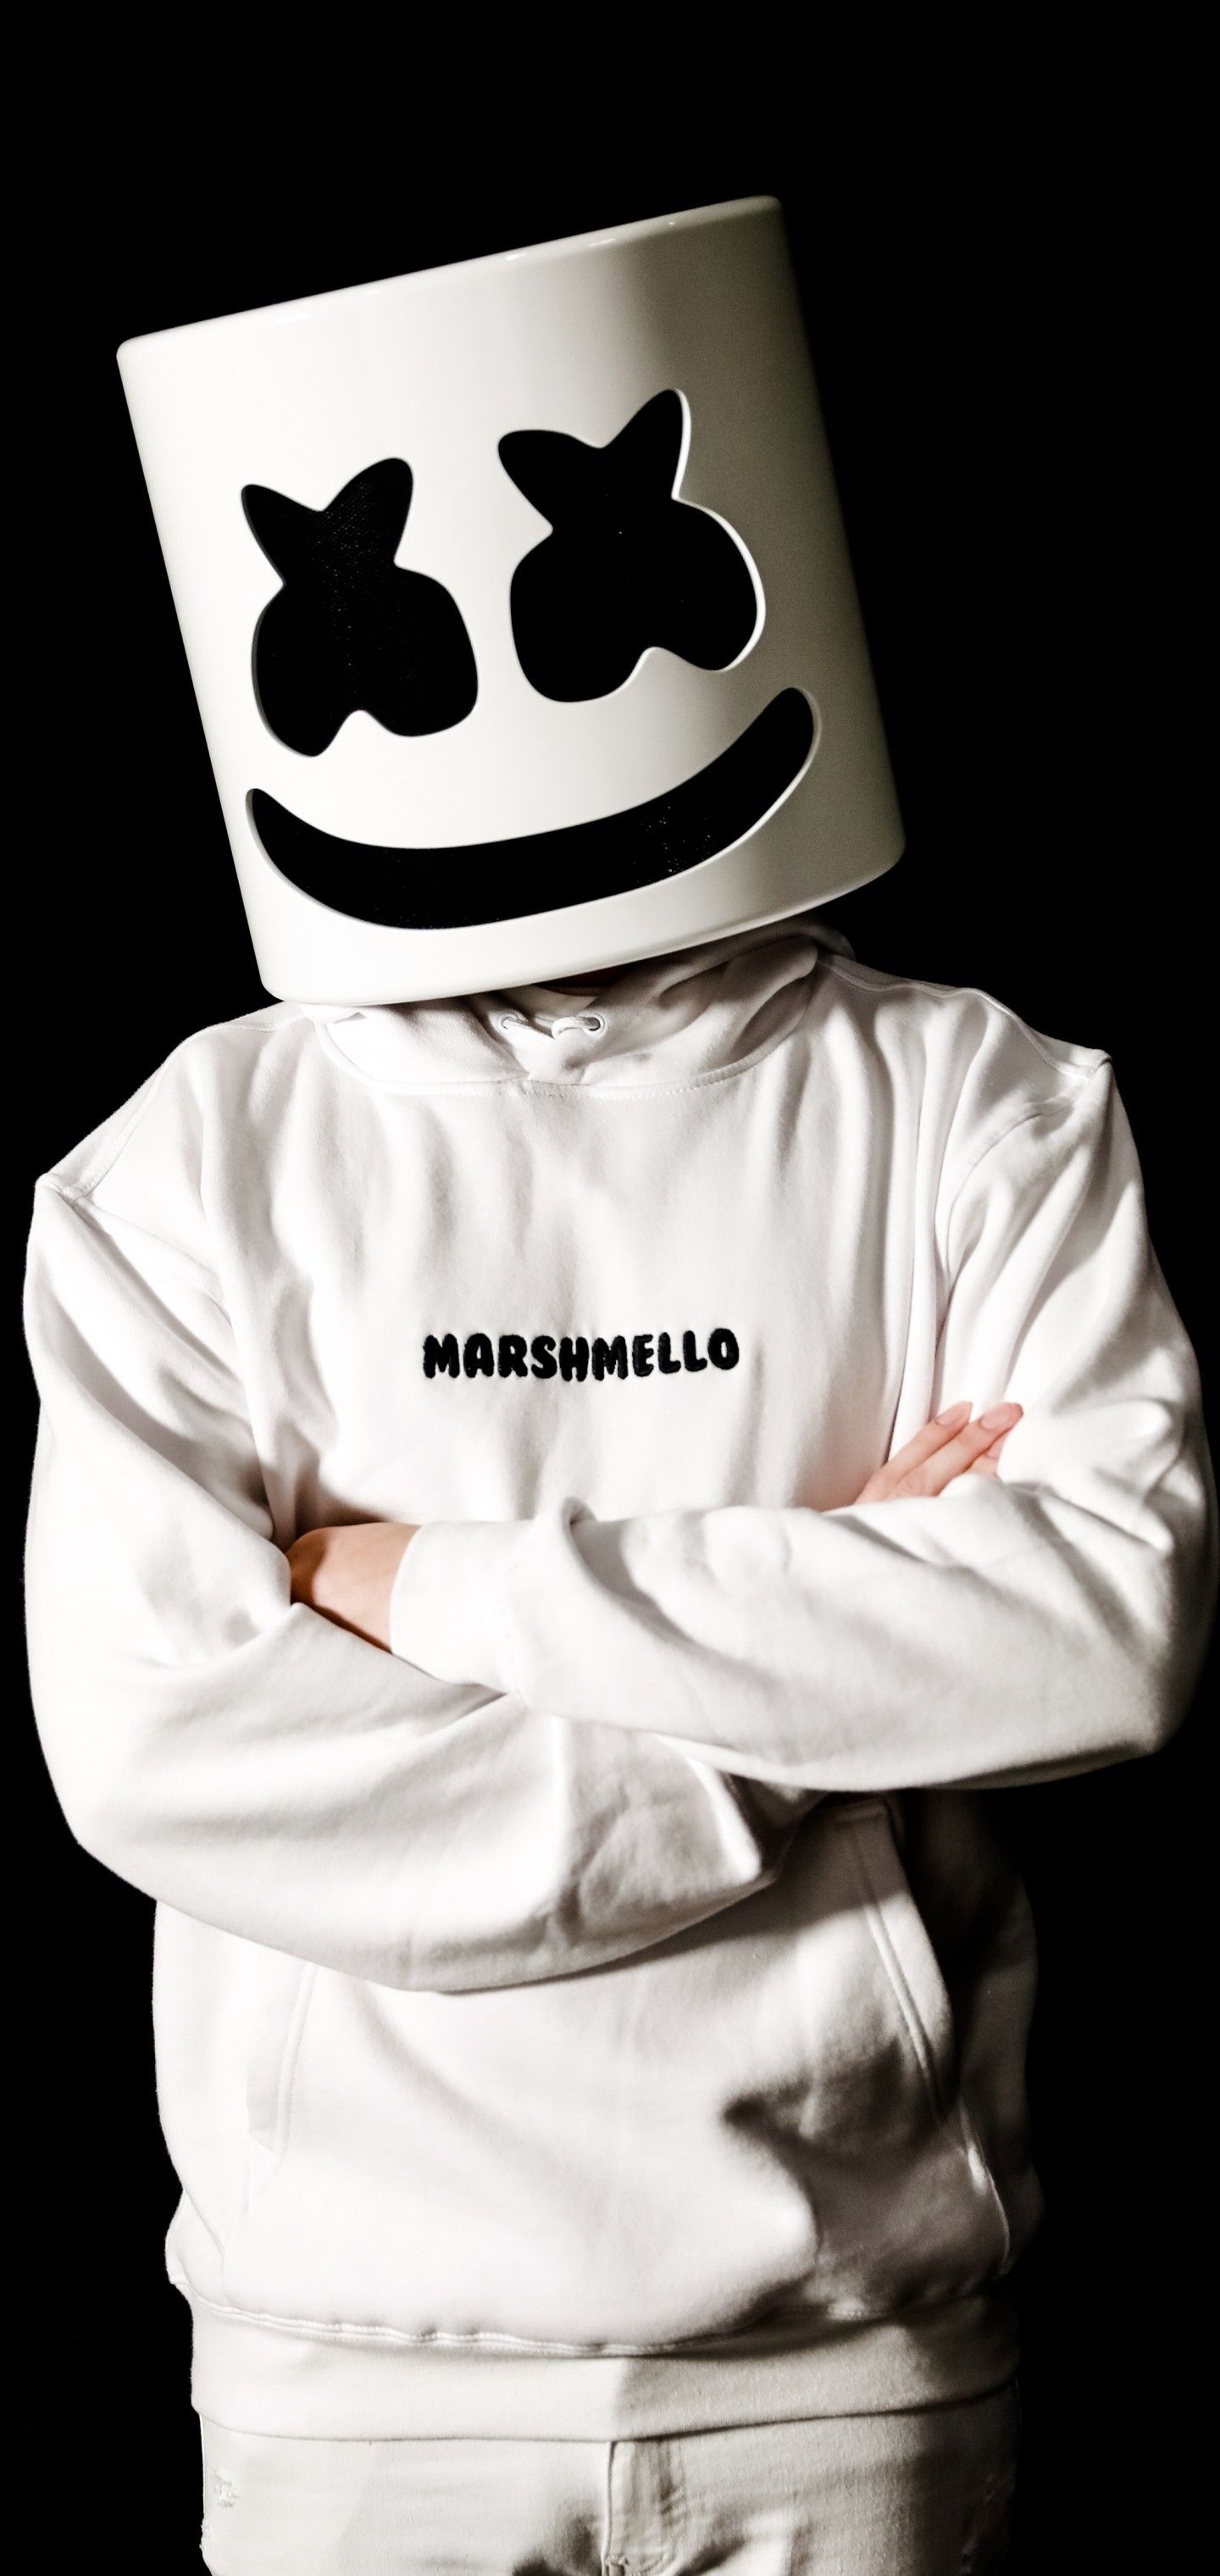 Download 1440x3040 Marshmello, Music Producer, Mask Wallpaper for Samsung Galaxy S10 Plus